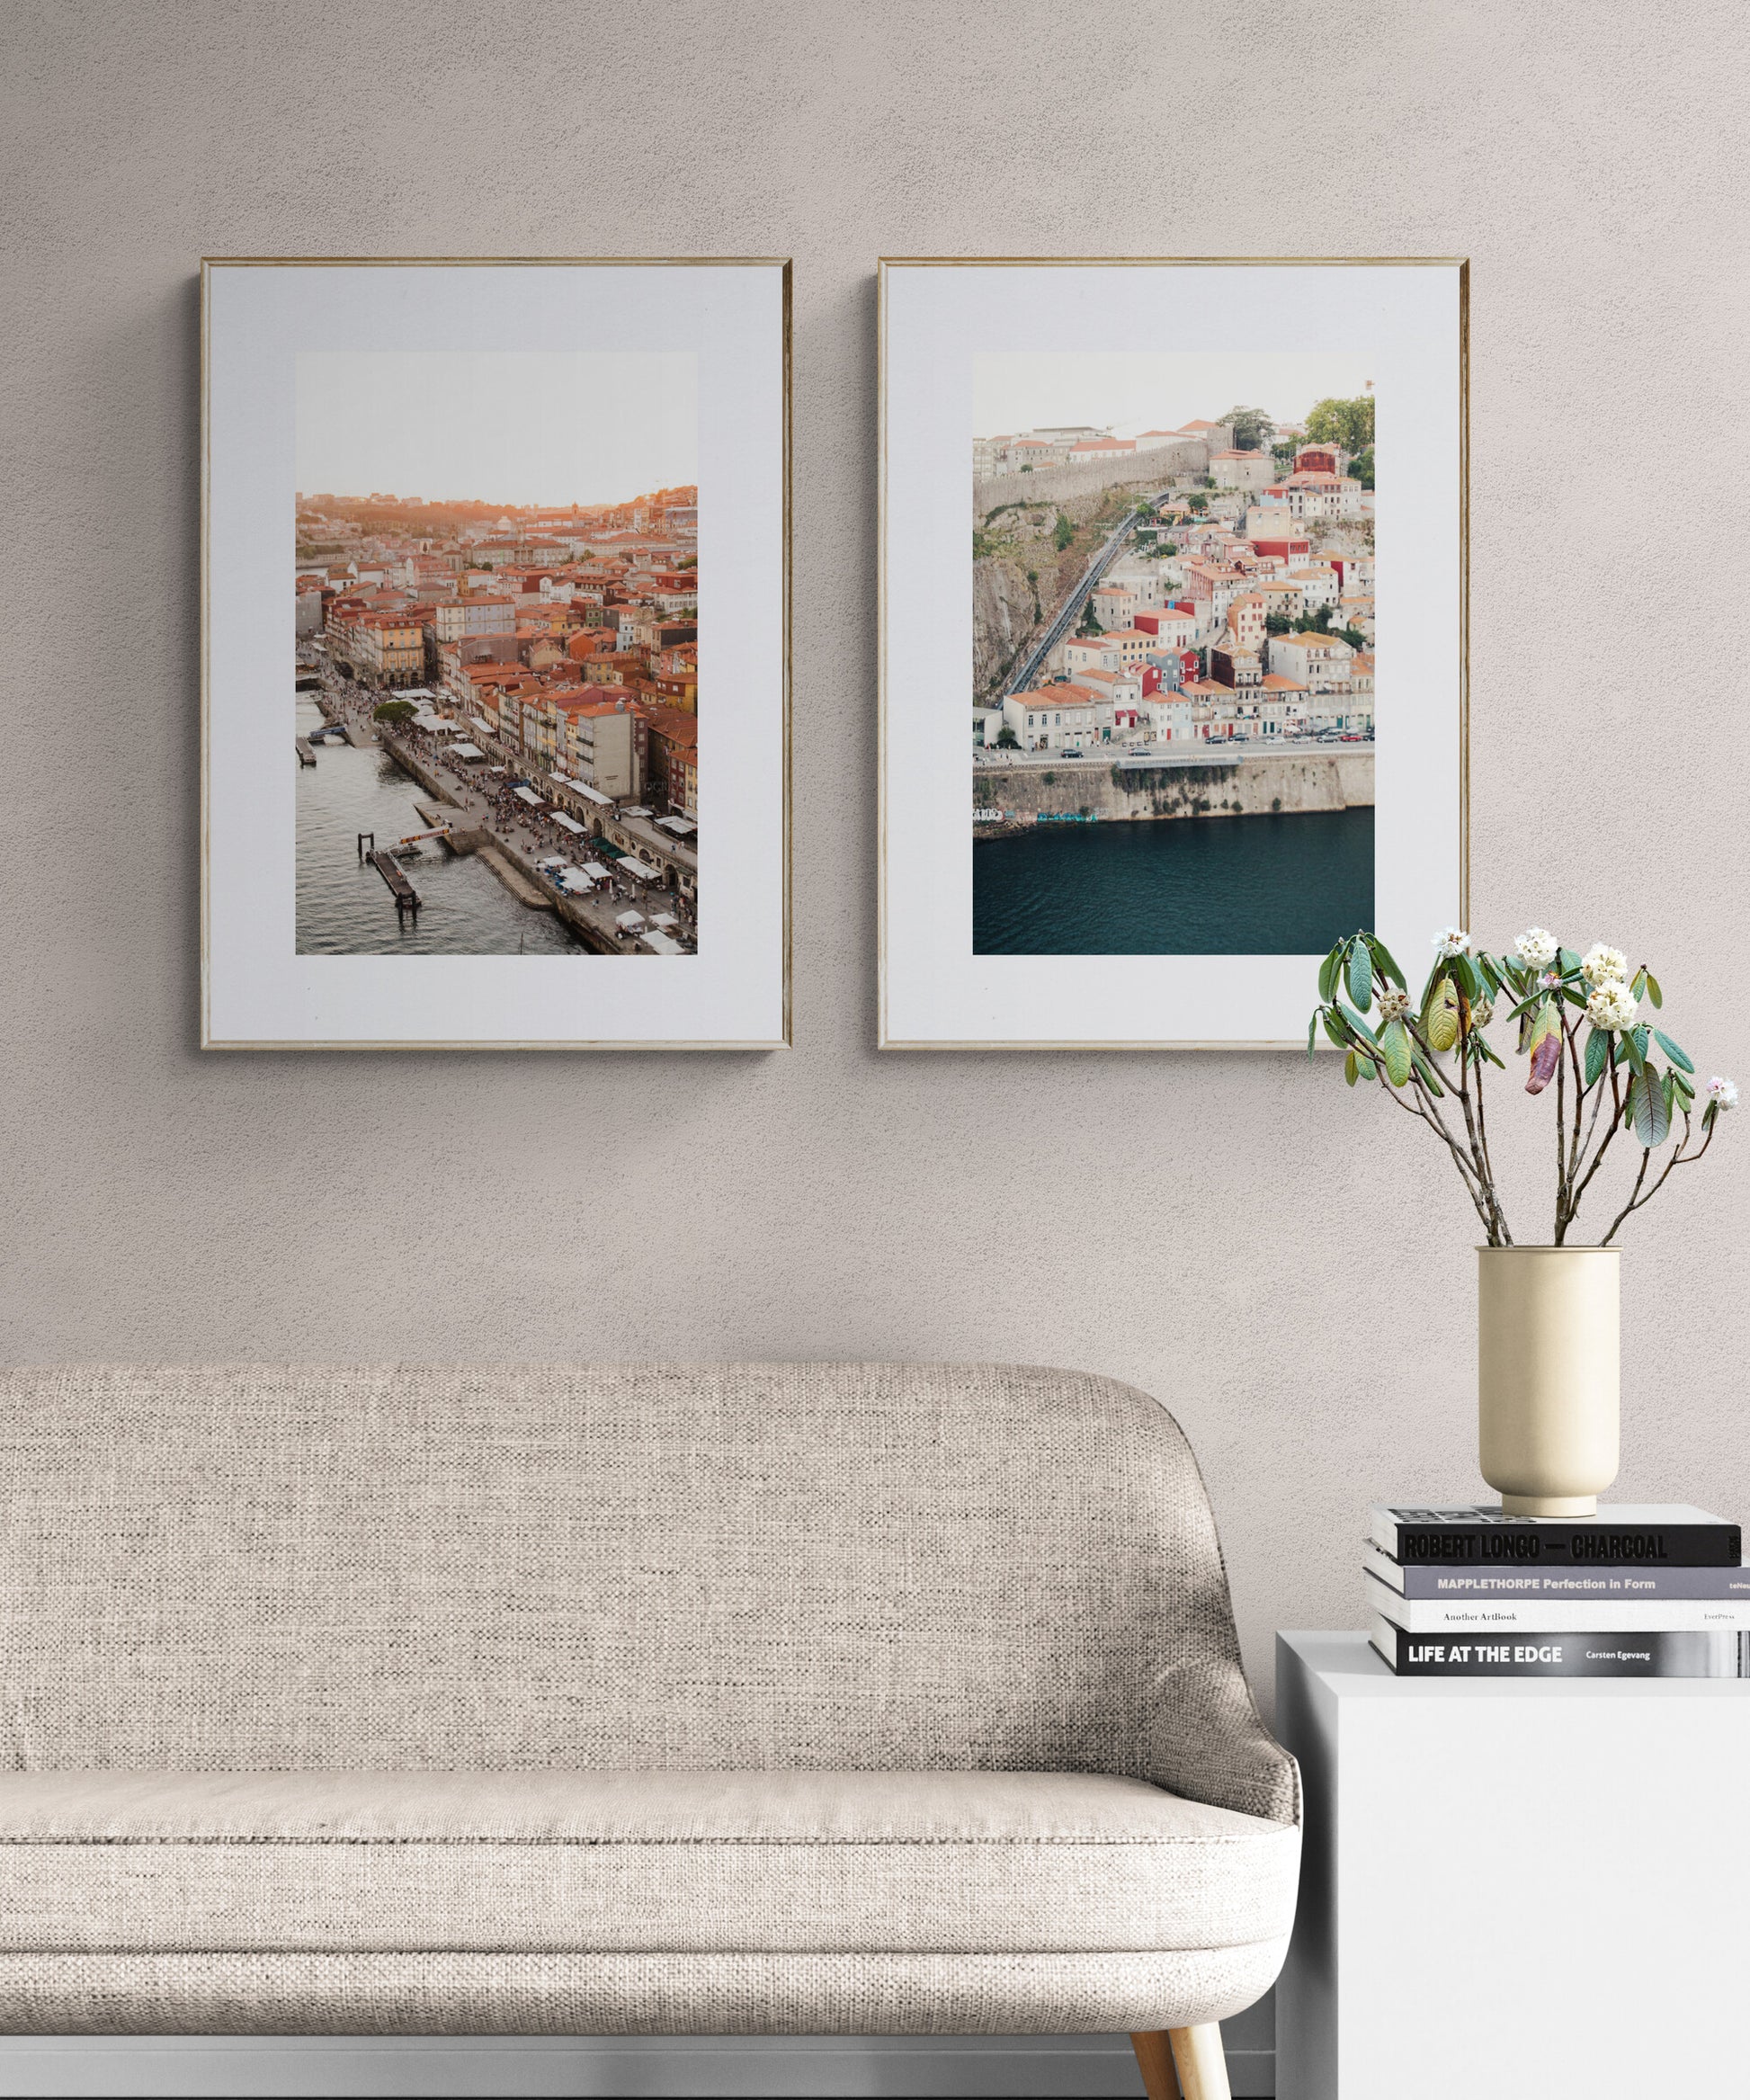 Set of two photographs of porto portugal at sunset in a living room